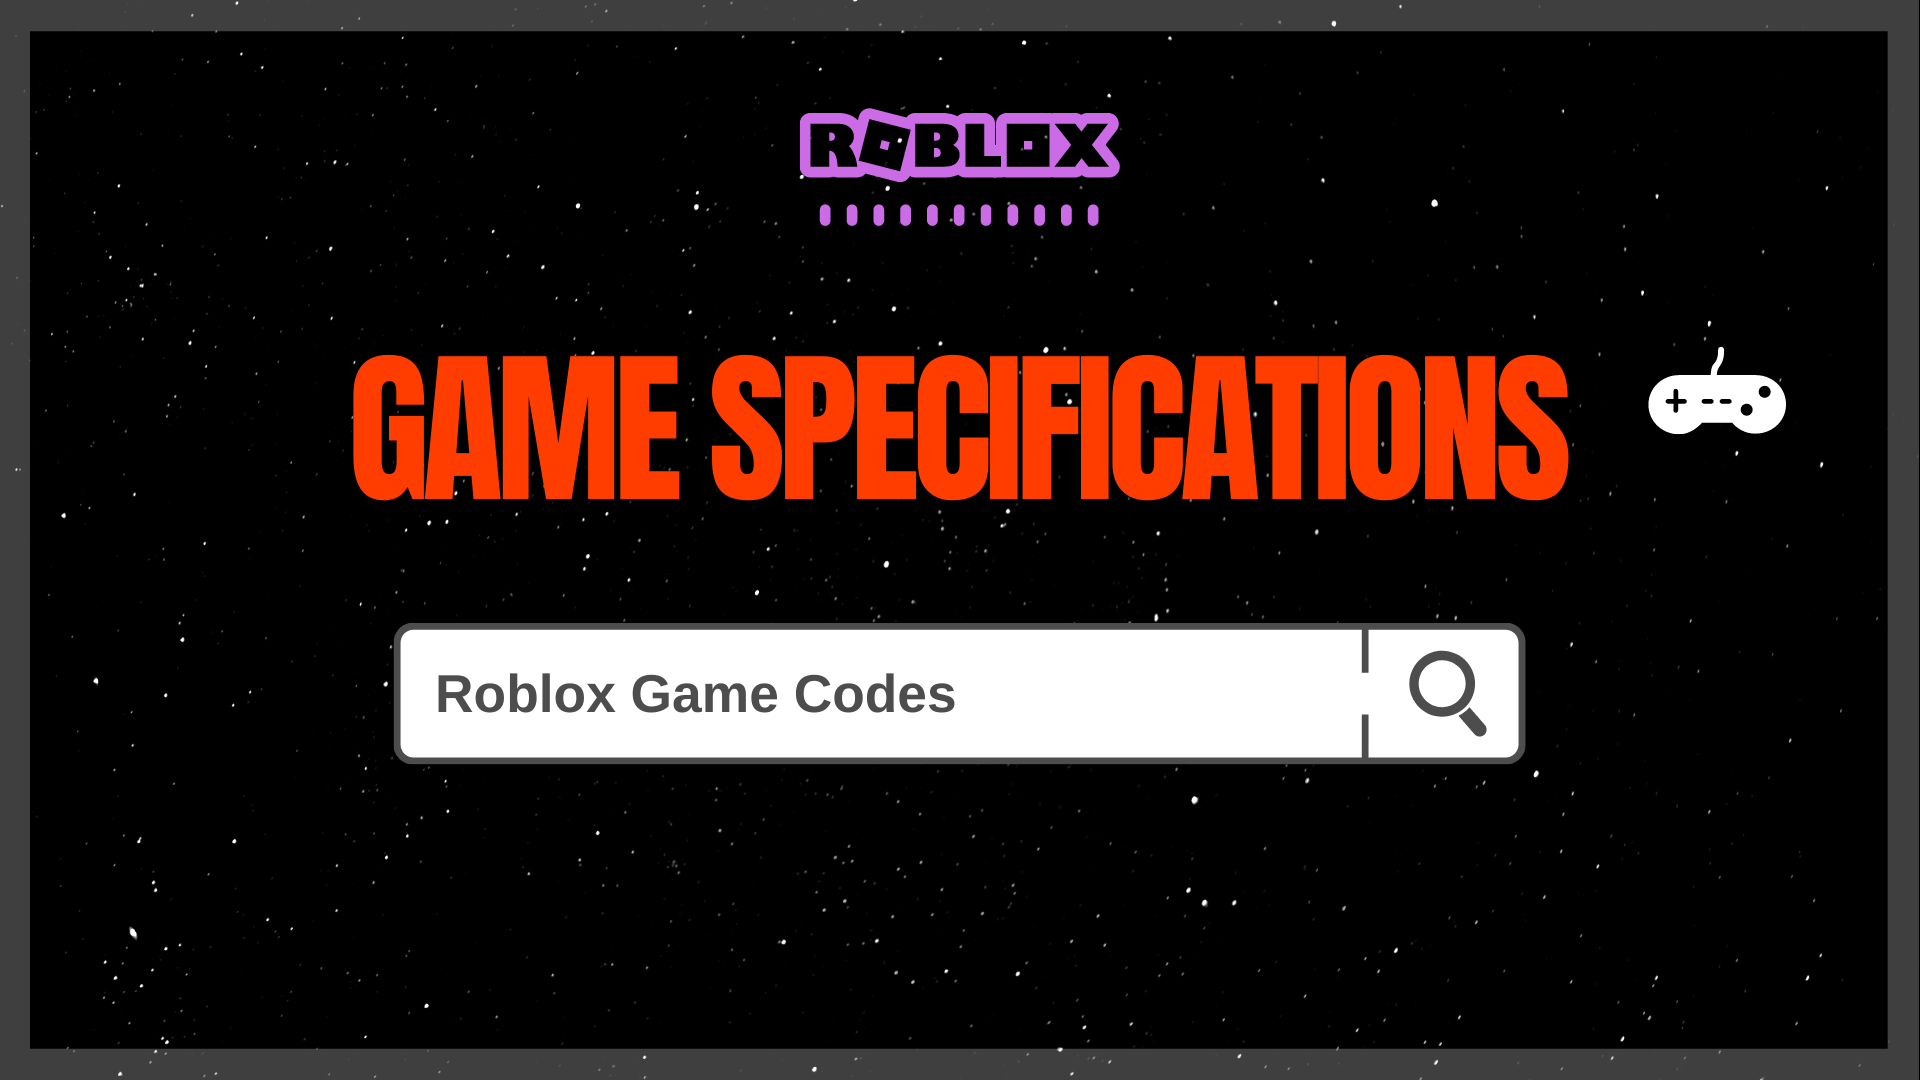 All In One Roblox Game Codes ᐈ Encylopedia Game Specifications - roblox gear codes paint bucket